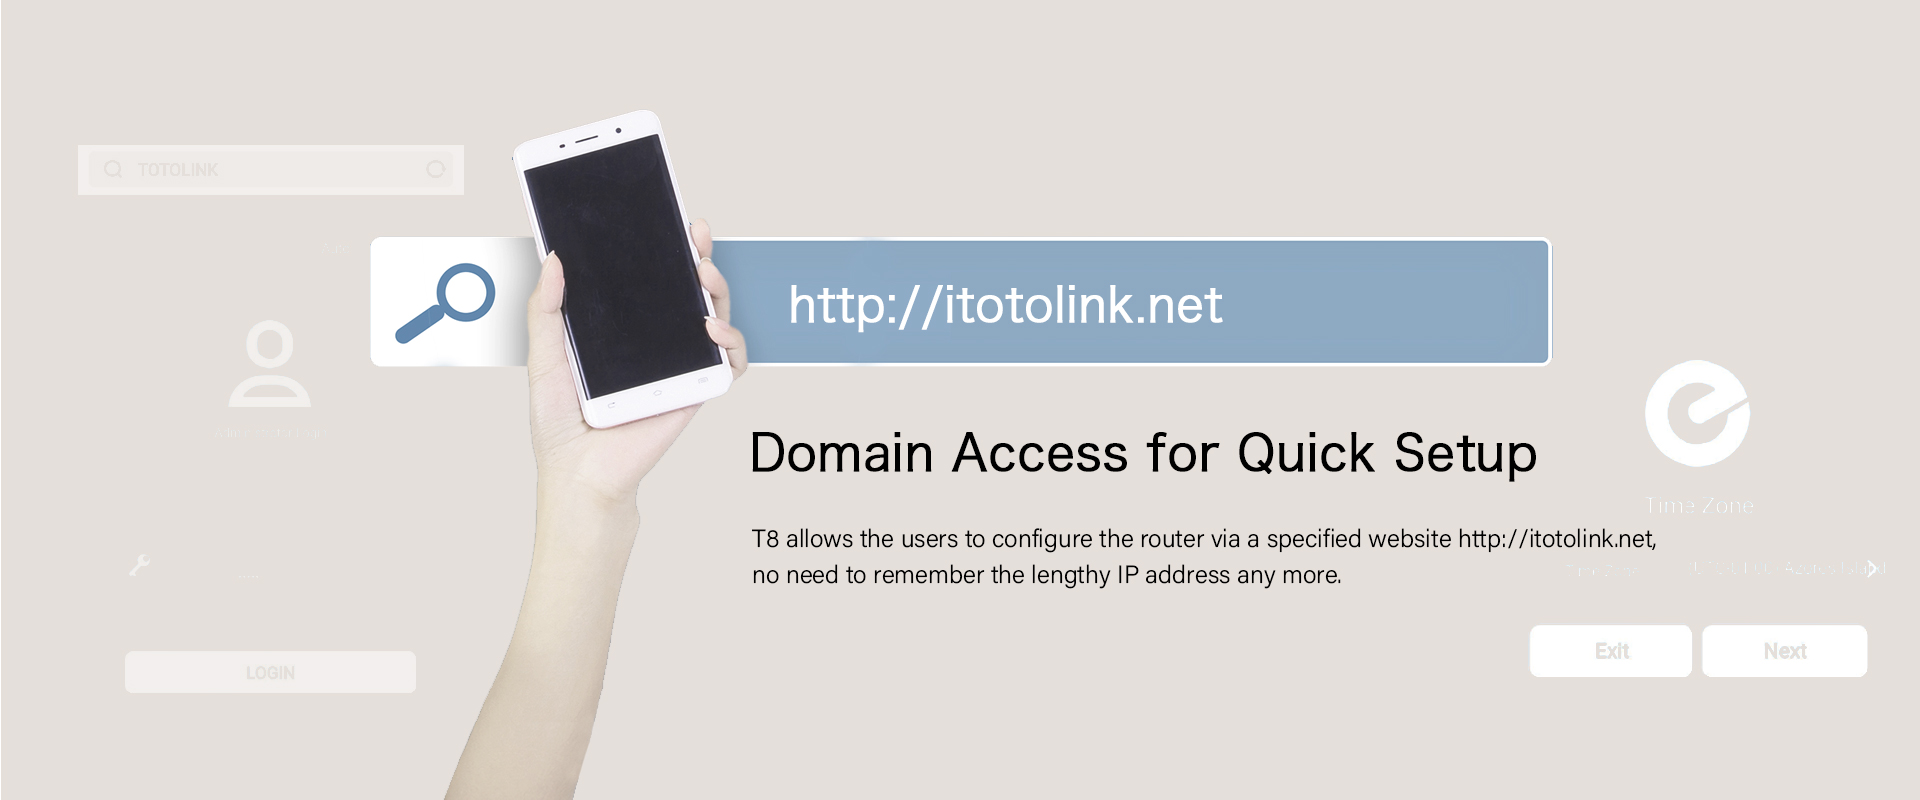 Support Router congiguration by domain access